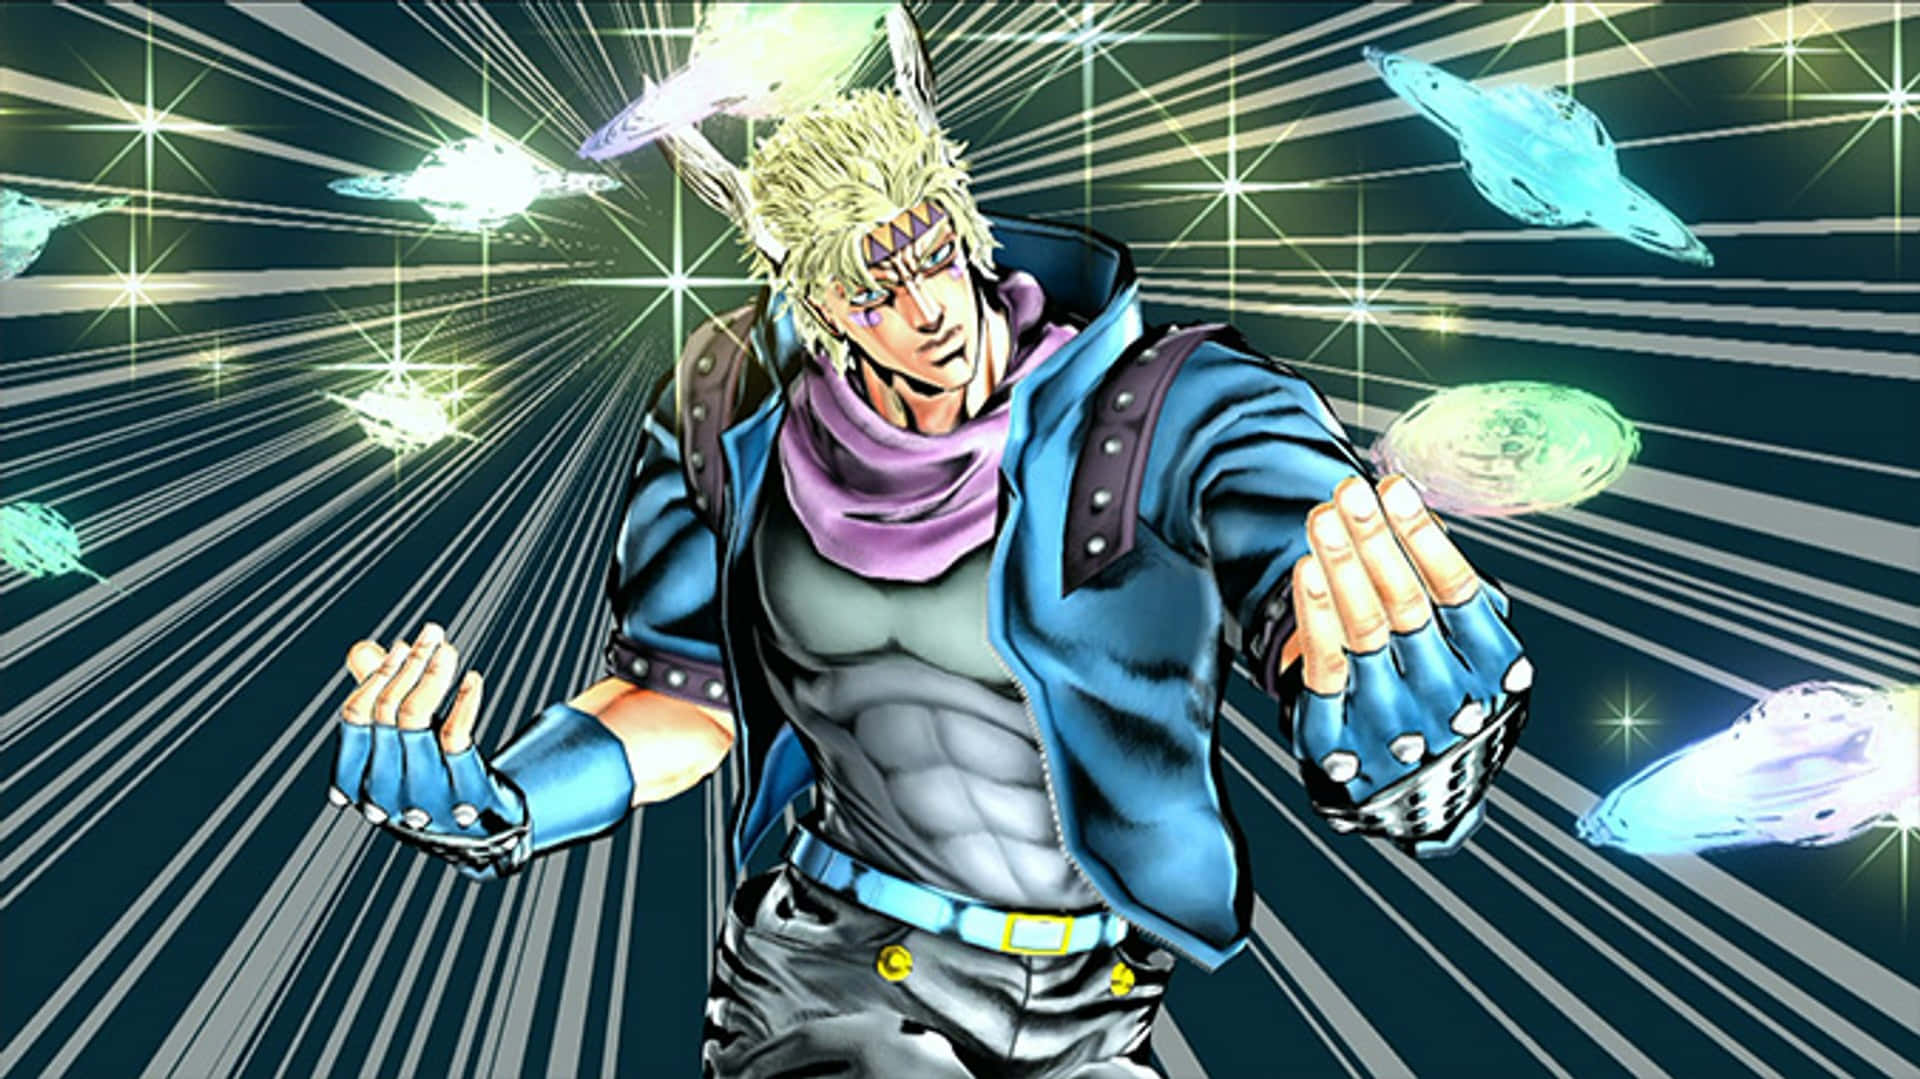 The Masterful Caesar Anthonio Zeppeli in Action Wallpaper